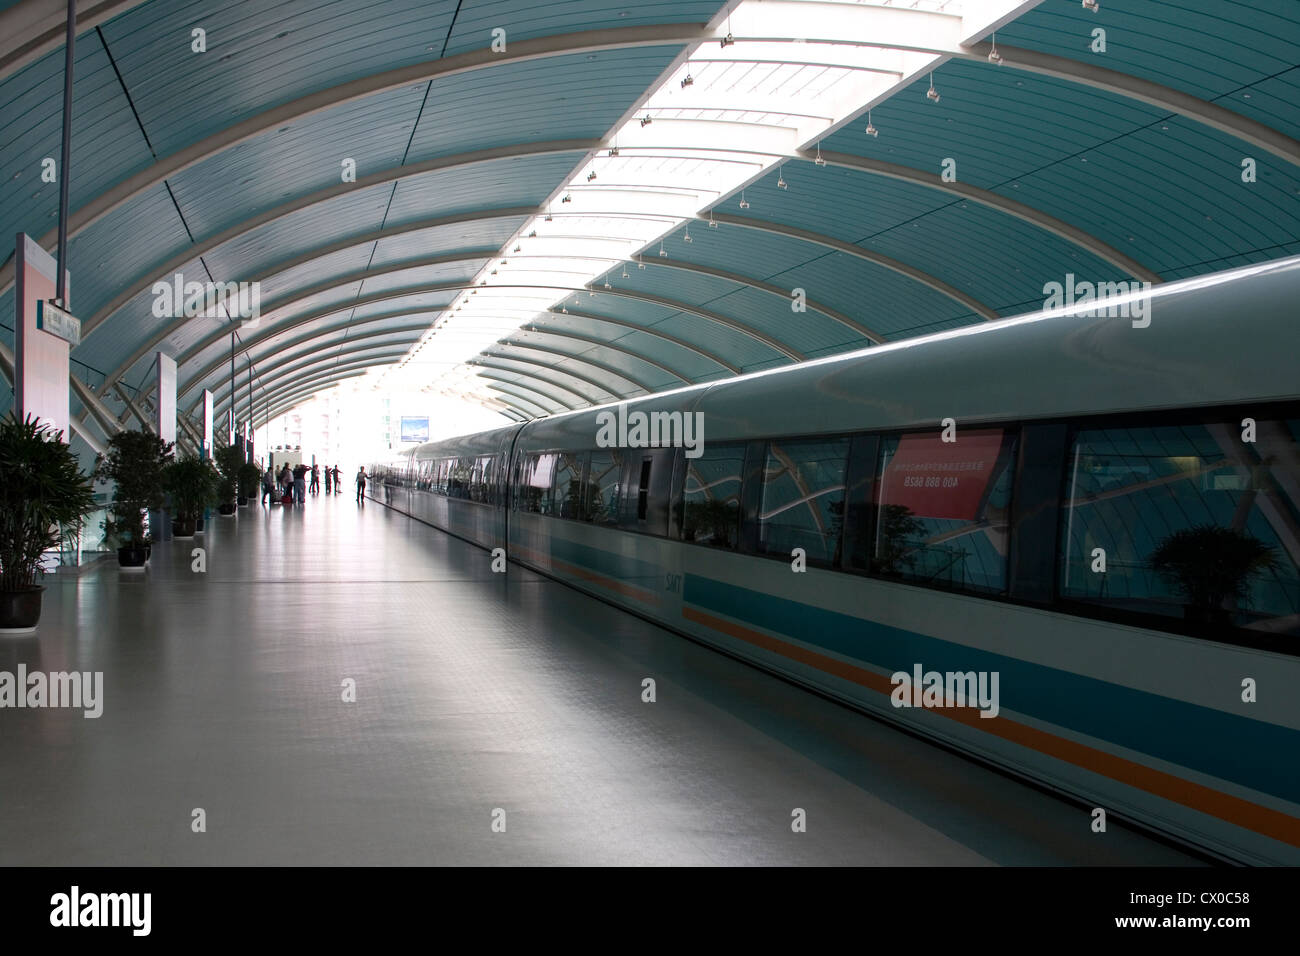 Bullet train waiting in the station, Shanghai, China Stock Photo